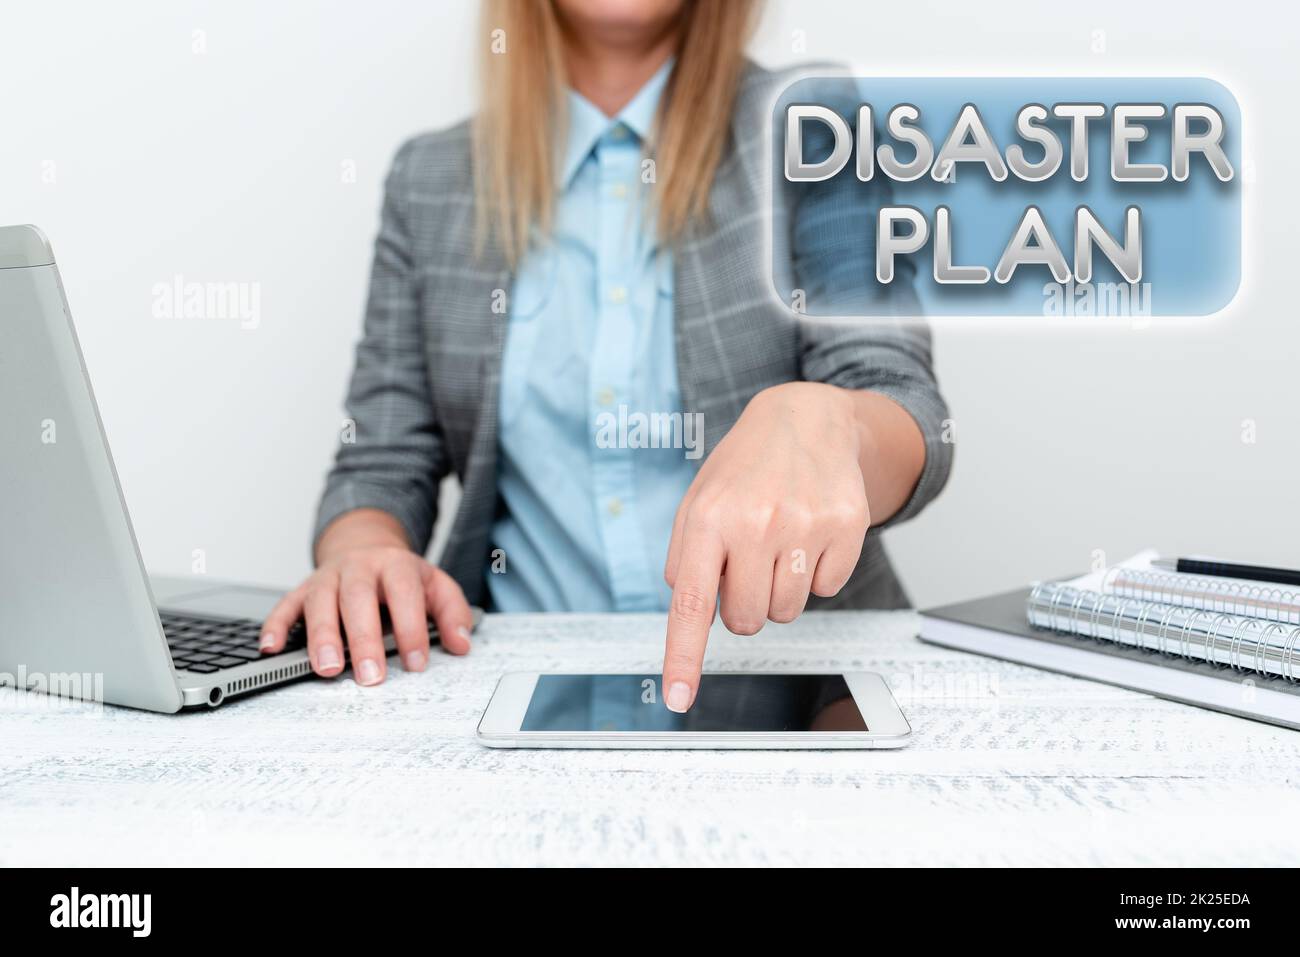 Text caption presenting Disaster Plan. Concept meaning Respond to Emergency Preparedness Survival and First Aid Kit Architect Interviewing Client, Reporther Gathering Important Informations Stock Photo